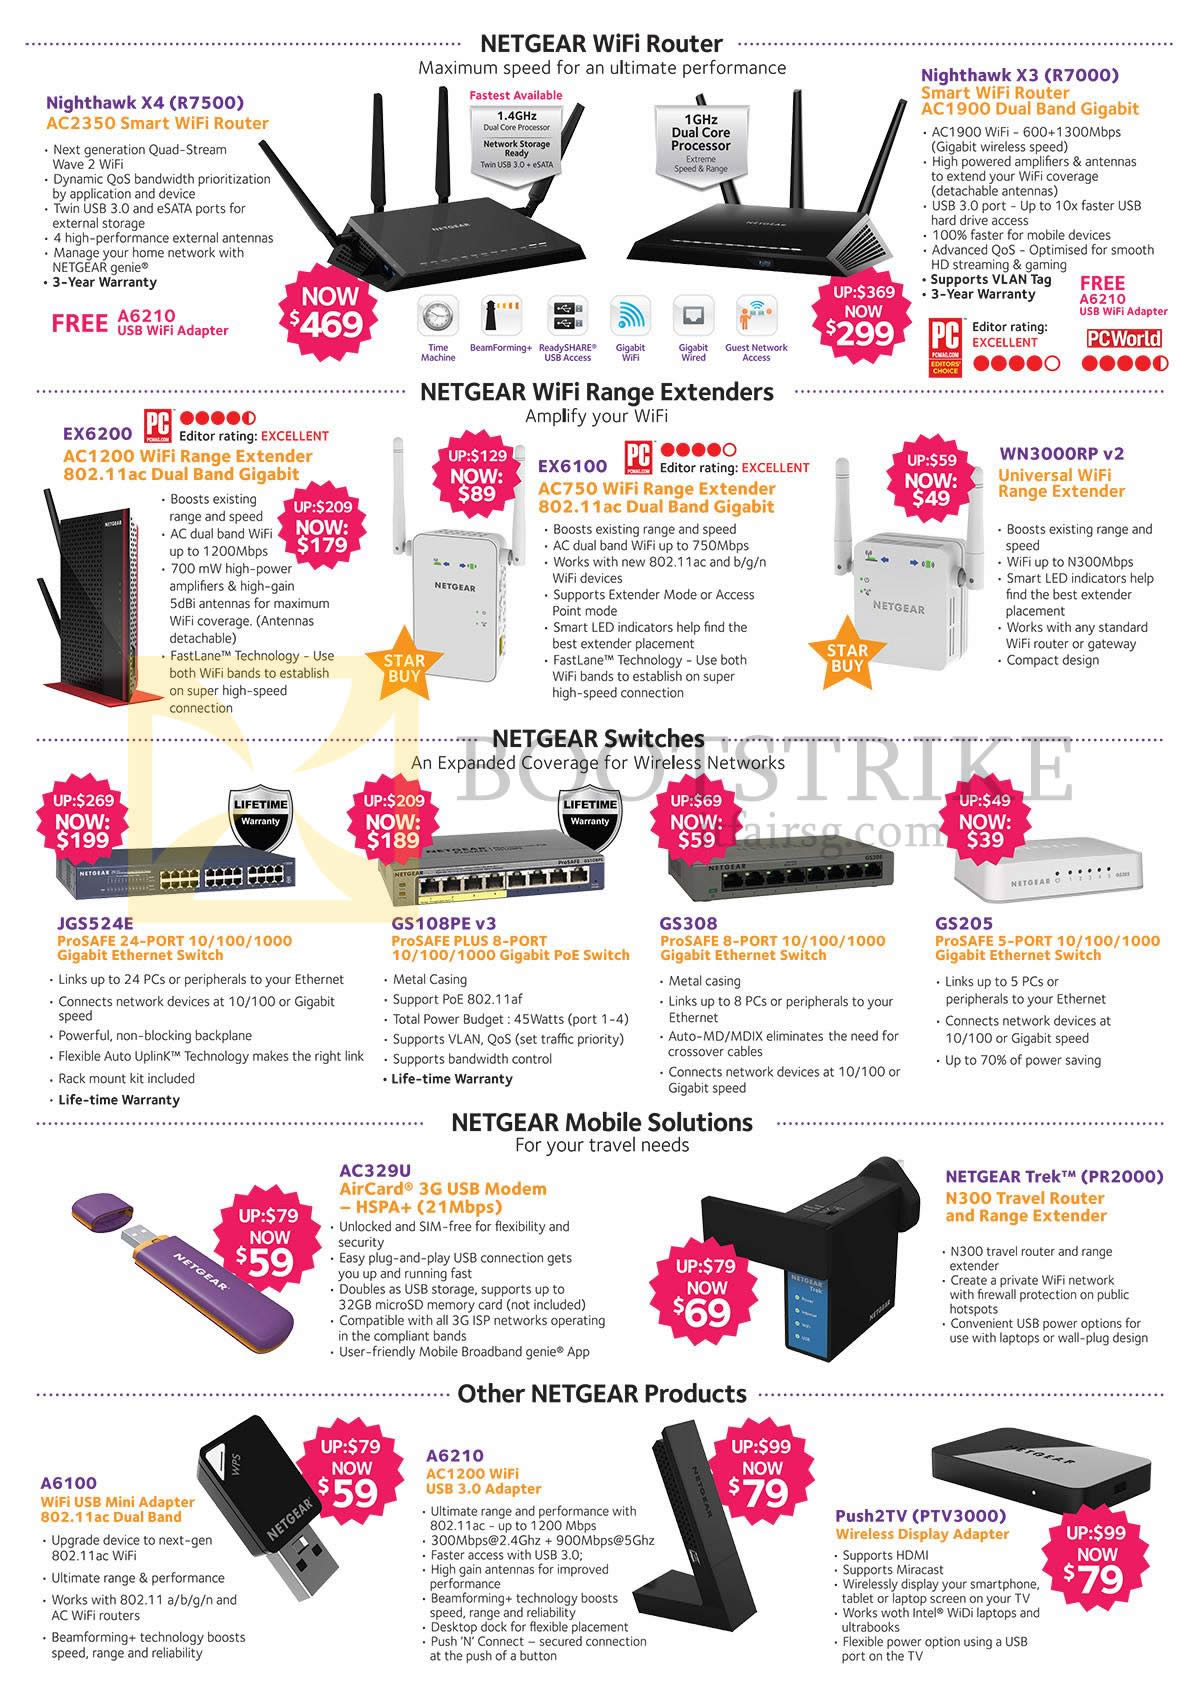 IT SHOW 2015 price list image brochure of Netgear Router, Range Extenders, Switches, USB Adapter, Nighthawk X4 R7500, X3 R7000, EX6200, EX6100, WN3000RPv2, GS108PE V3, AC329U, Trek PR2000, Push2TV PTV3000